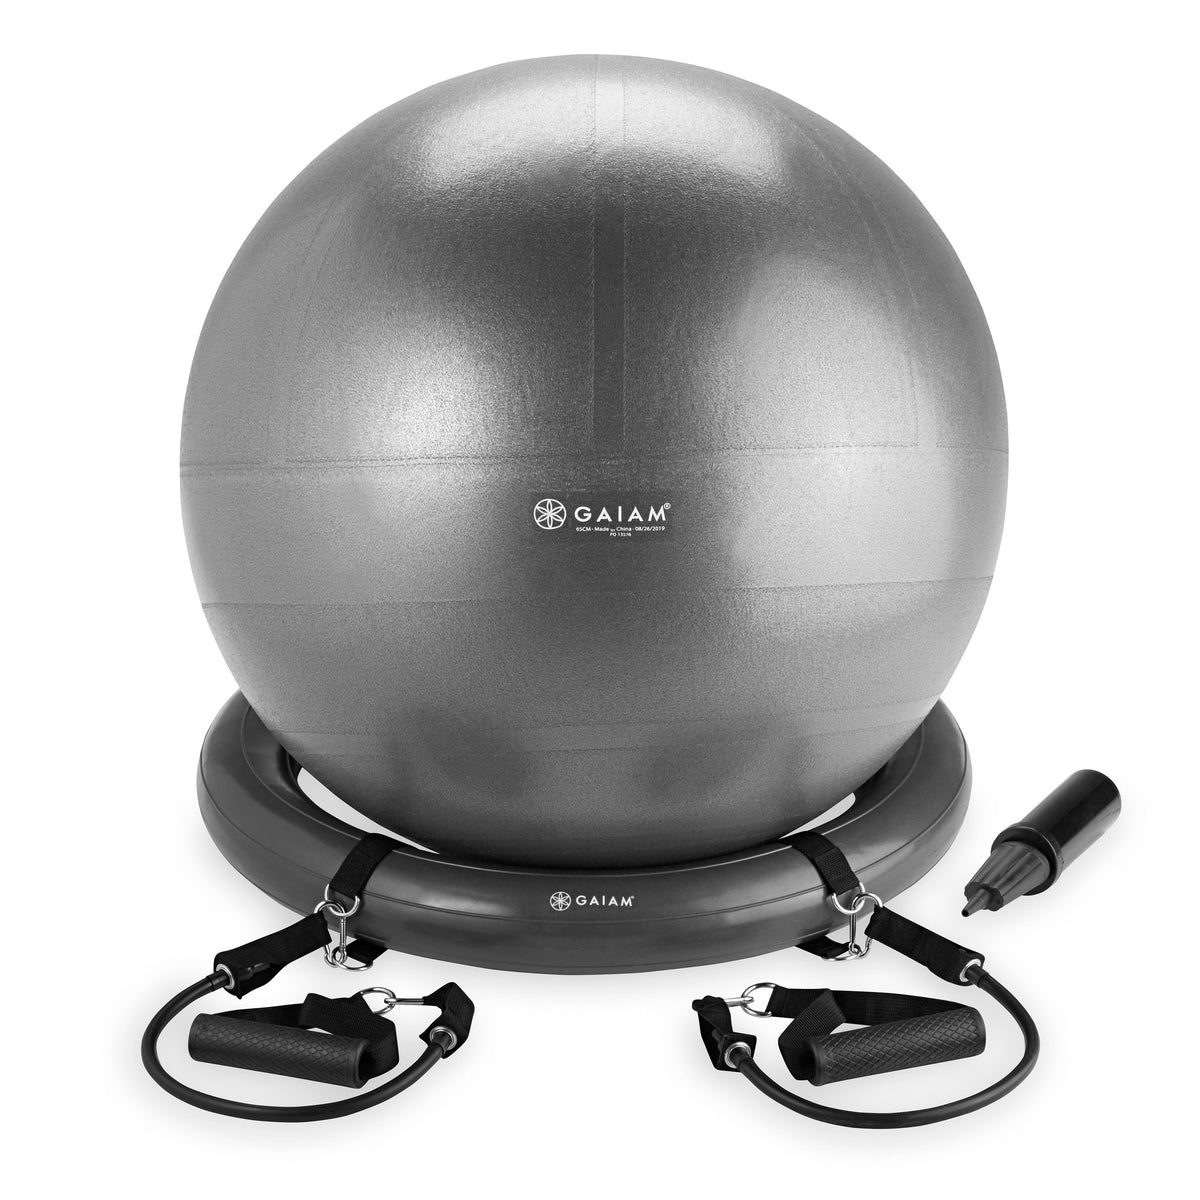 Stability Ball, Base & Cord Fitness Kit